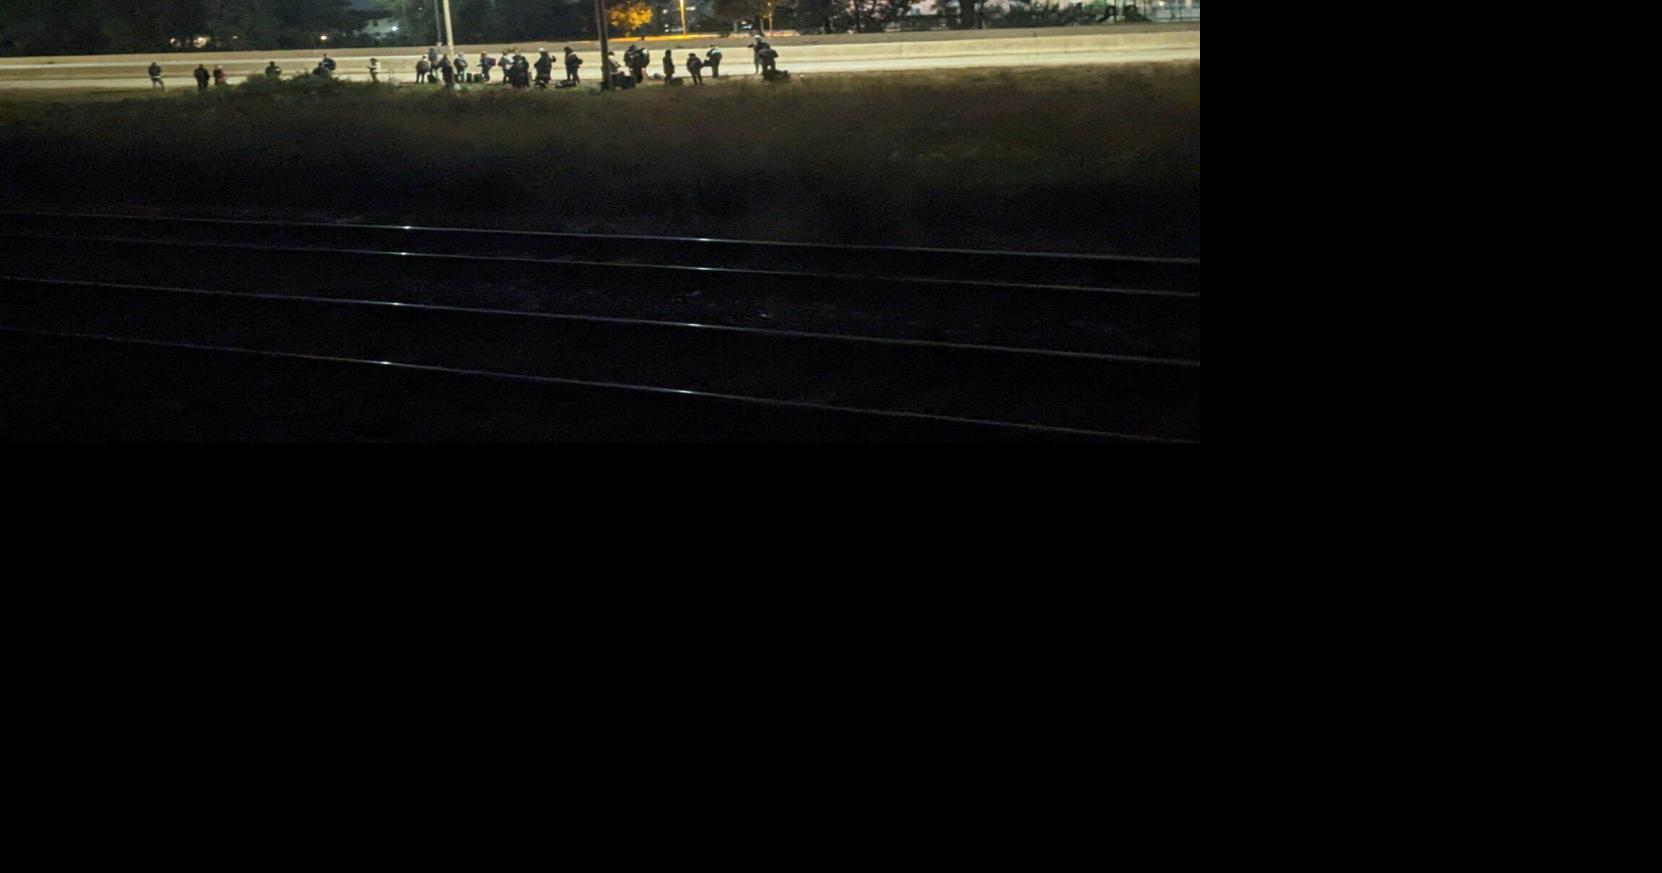 UPDATE: Amtrak trains stopped on tracks in East Chicago for hours moving again